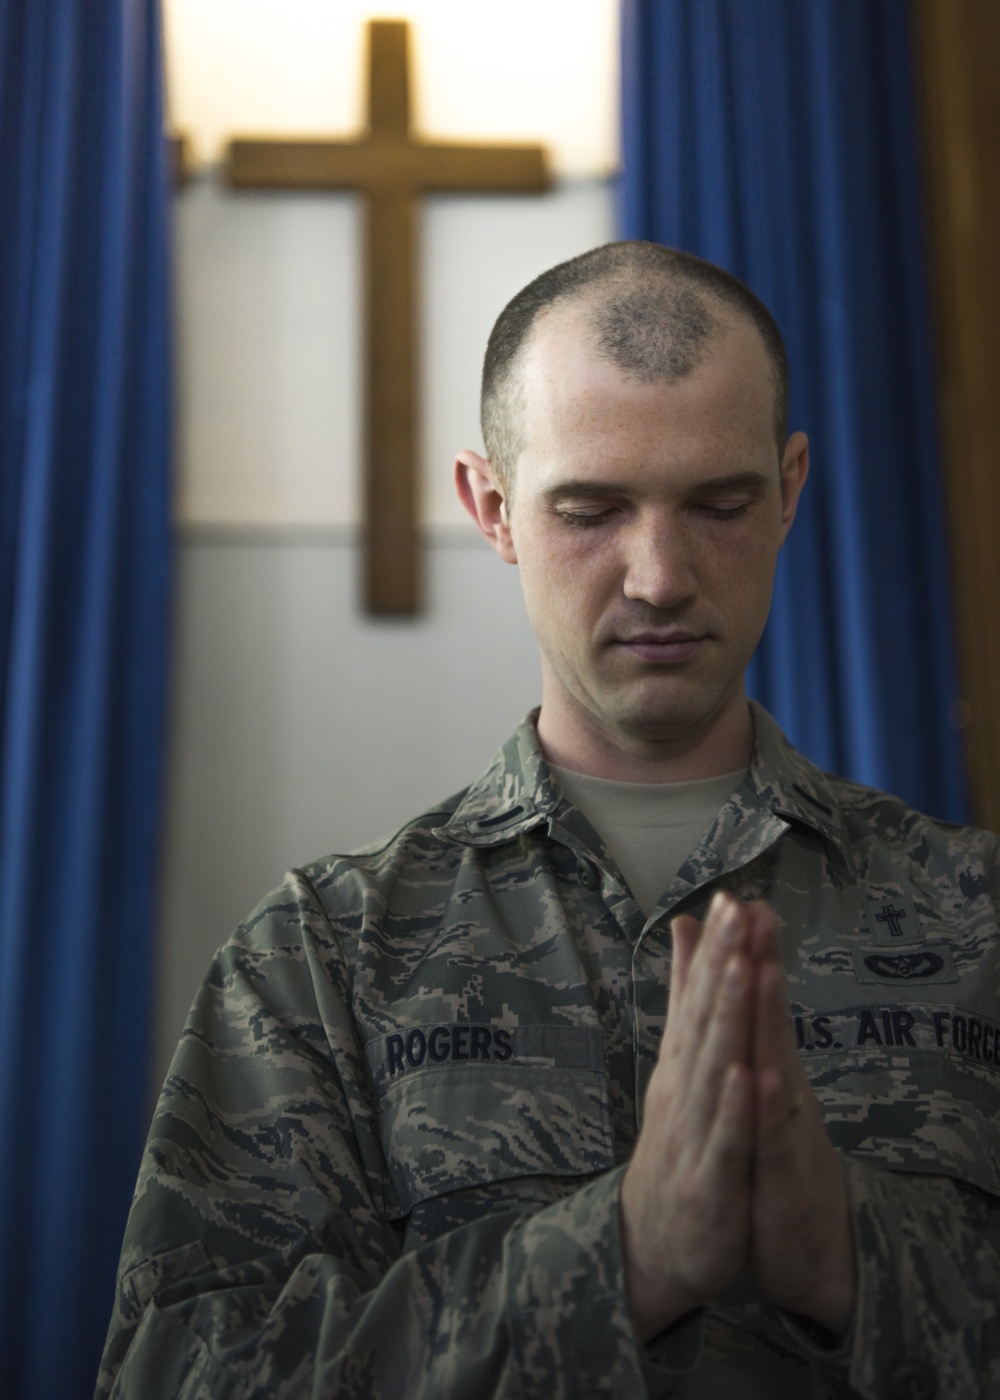 Chaplains take care of Airmen, Families during pandemic